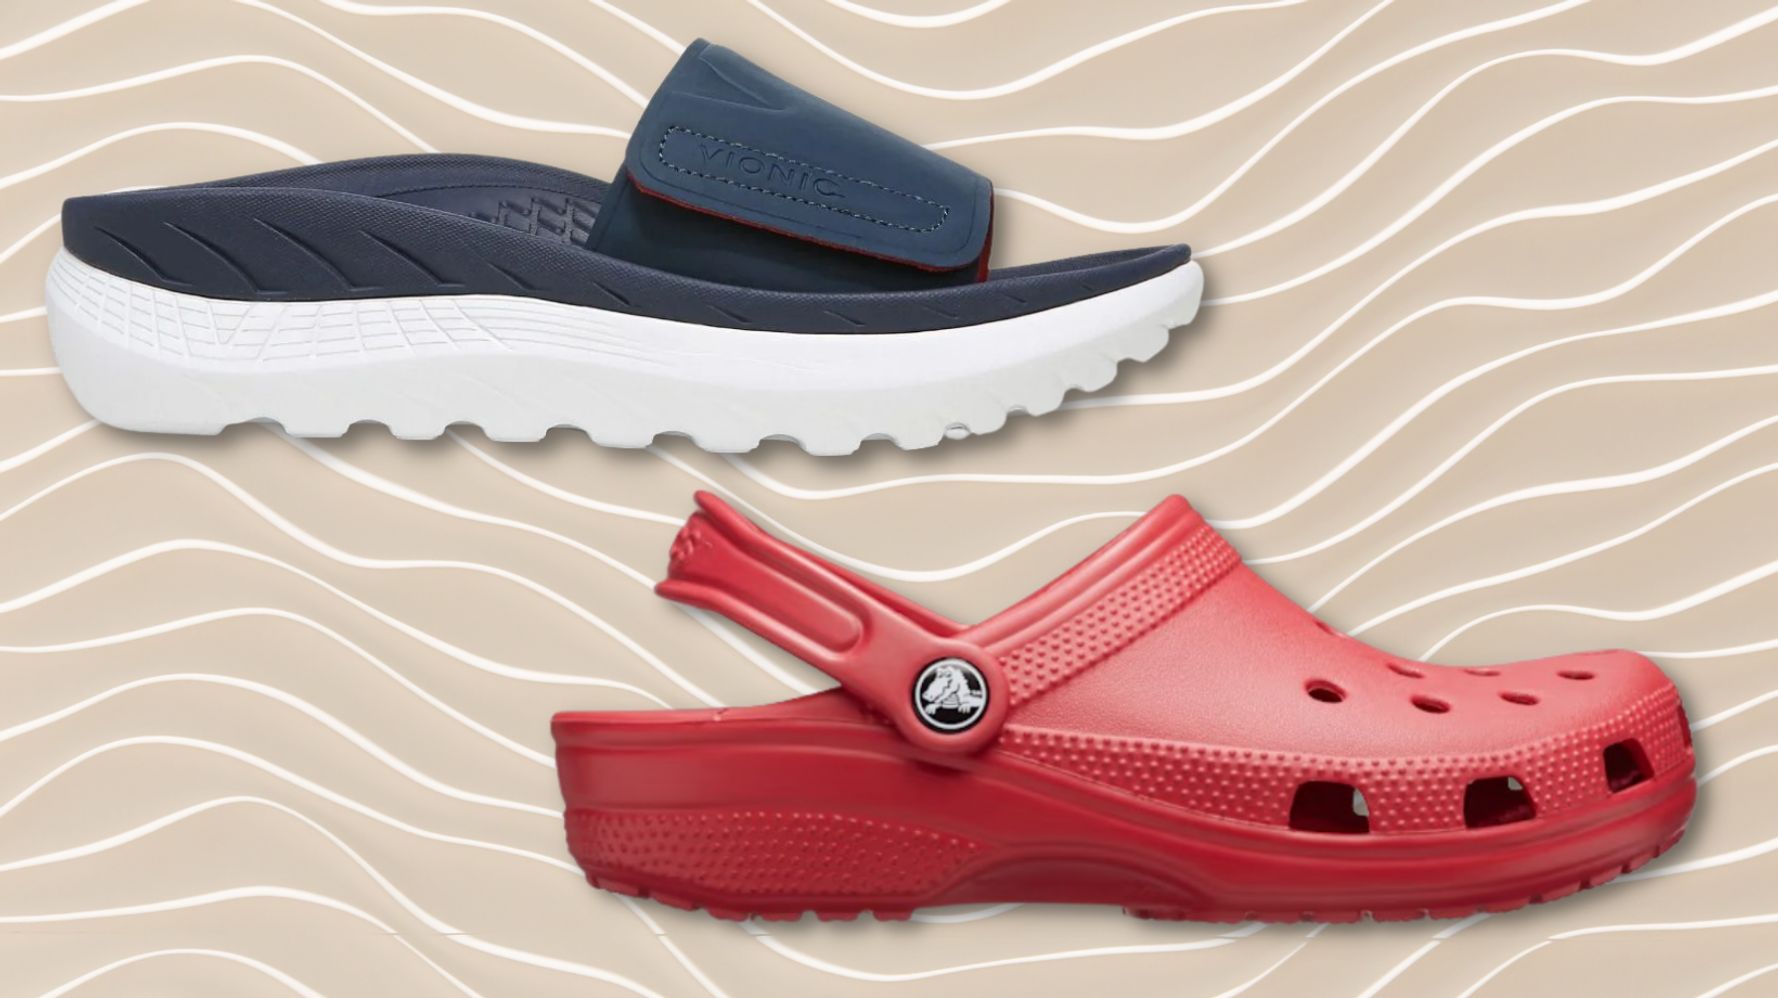 The Best Recovery Sandals, According To A Podiatrist